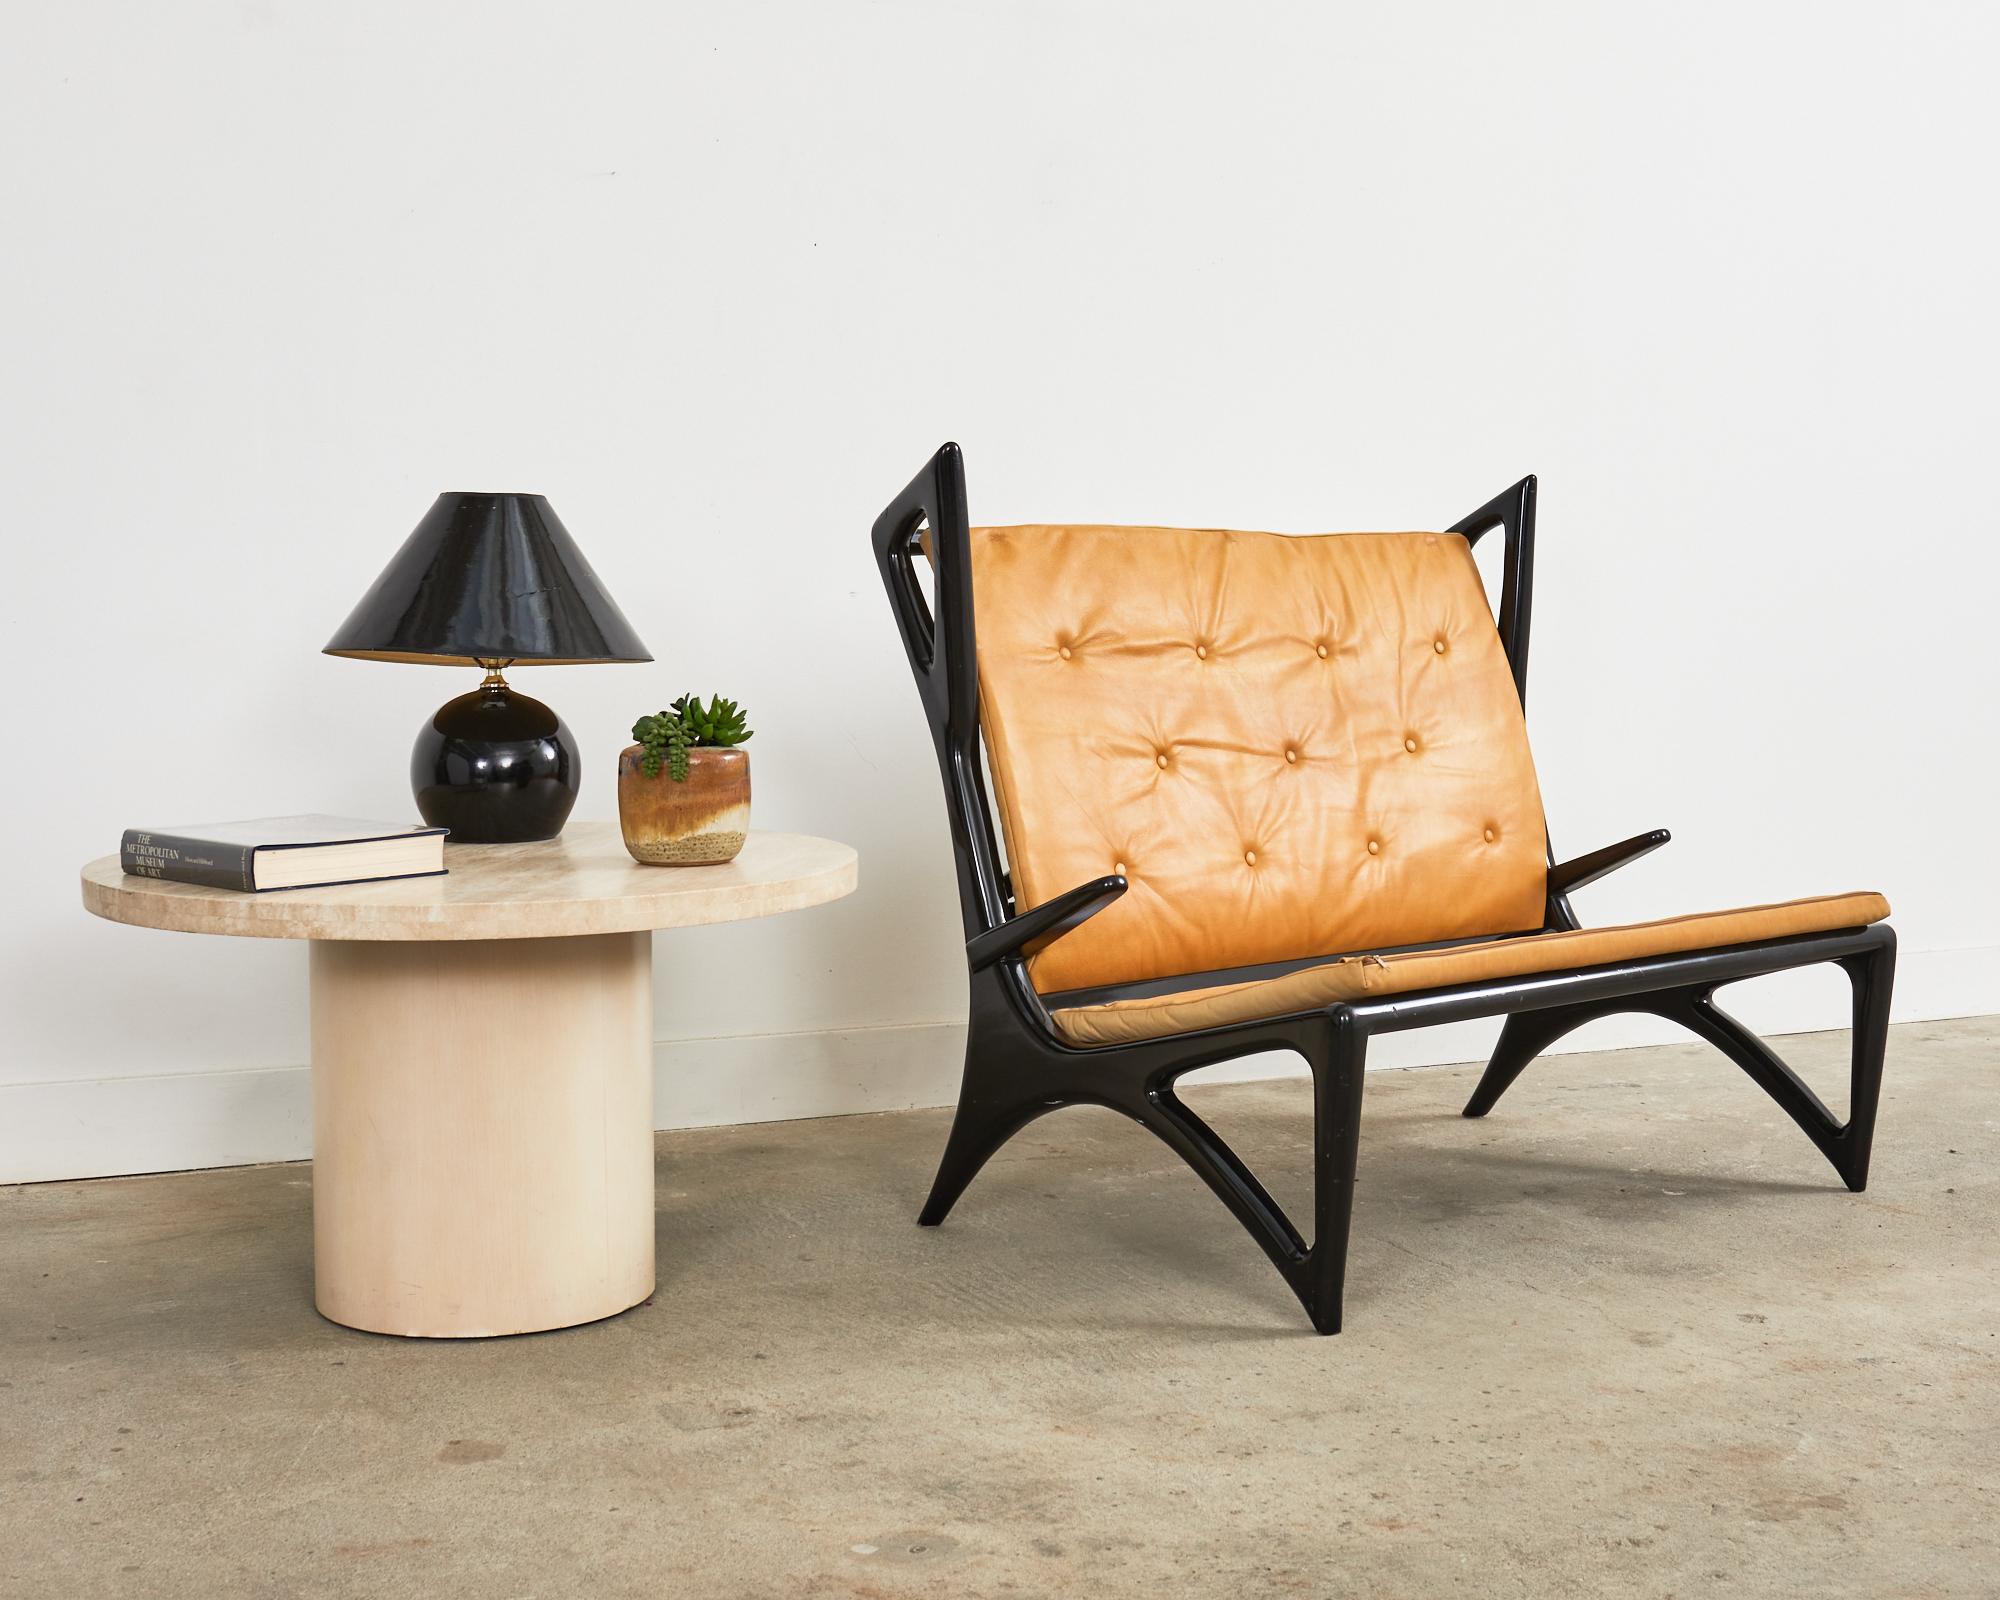 Dramatic Mid-Century Modern Italian sculptured settee or bench with wings. The settee features a black lacquer ebonized finish on the stylish frame with radically designed angular wings and legs. The gracefully curved frame is topped with button